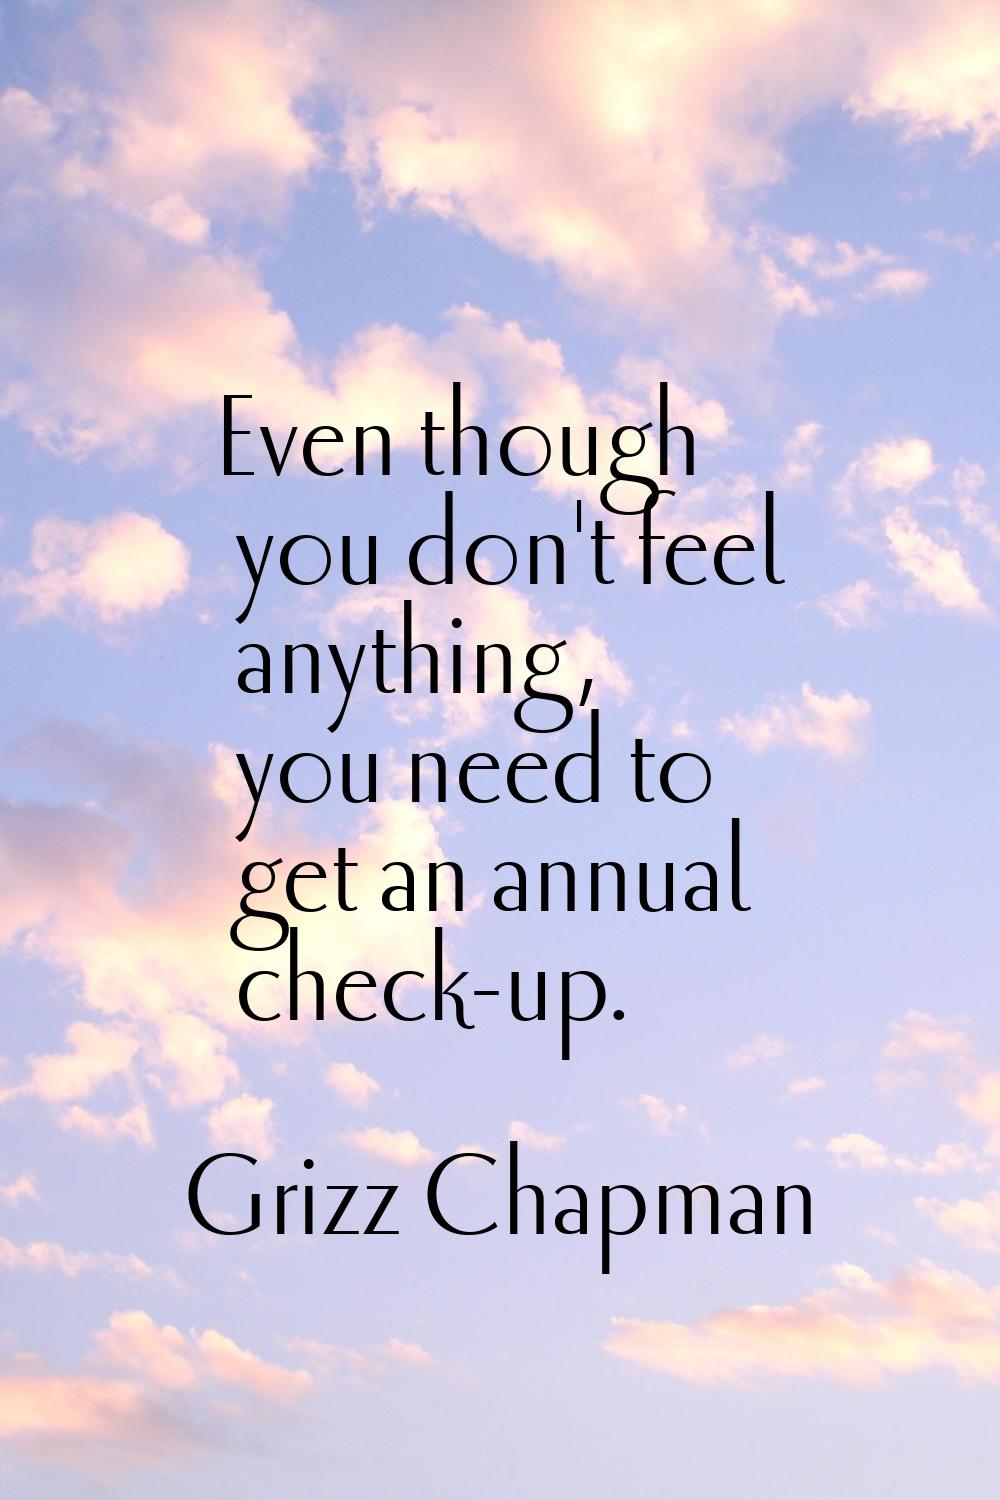 Even though you don't feel anything, you need to get an annual check-up.